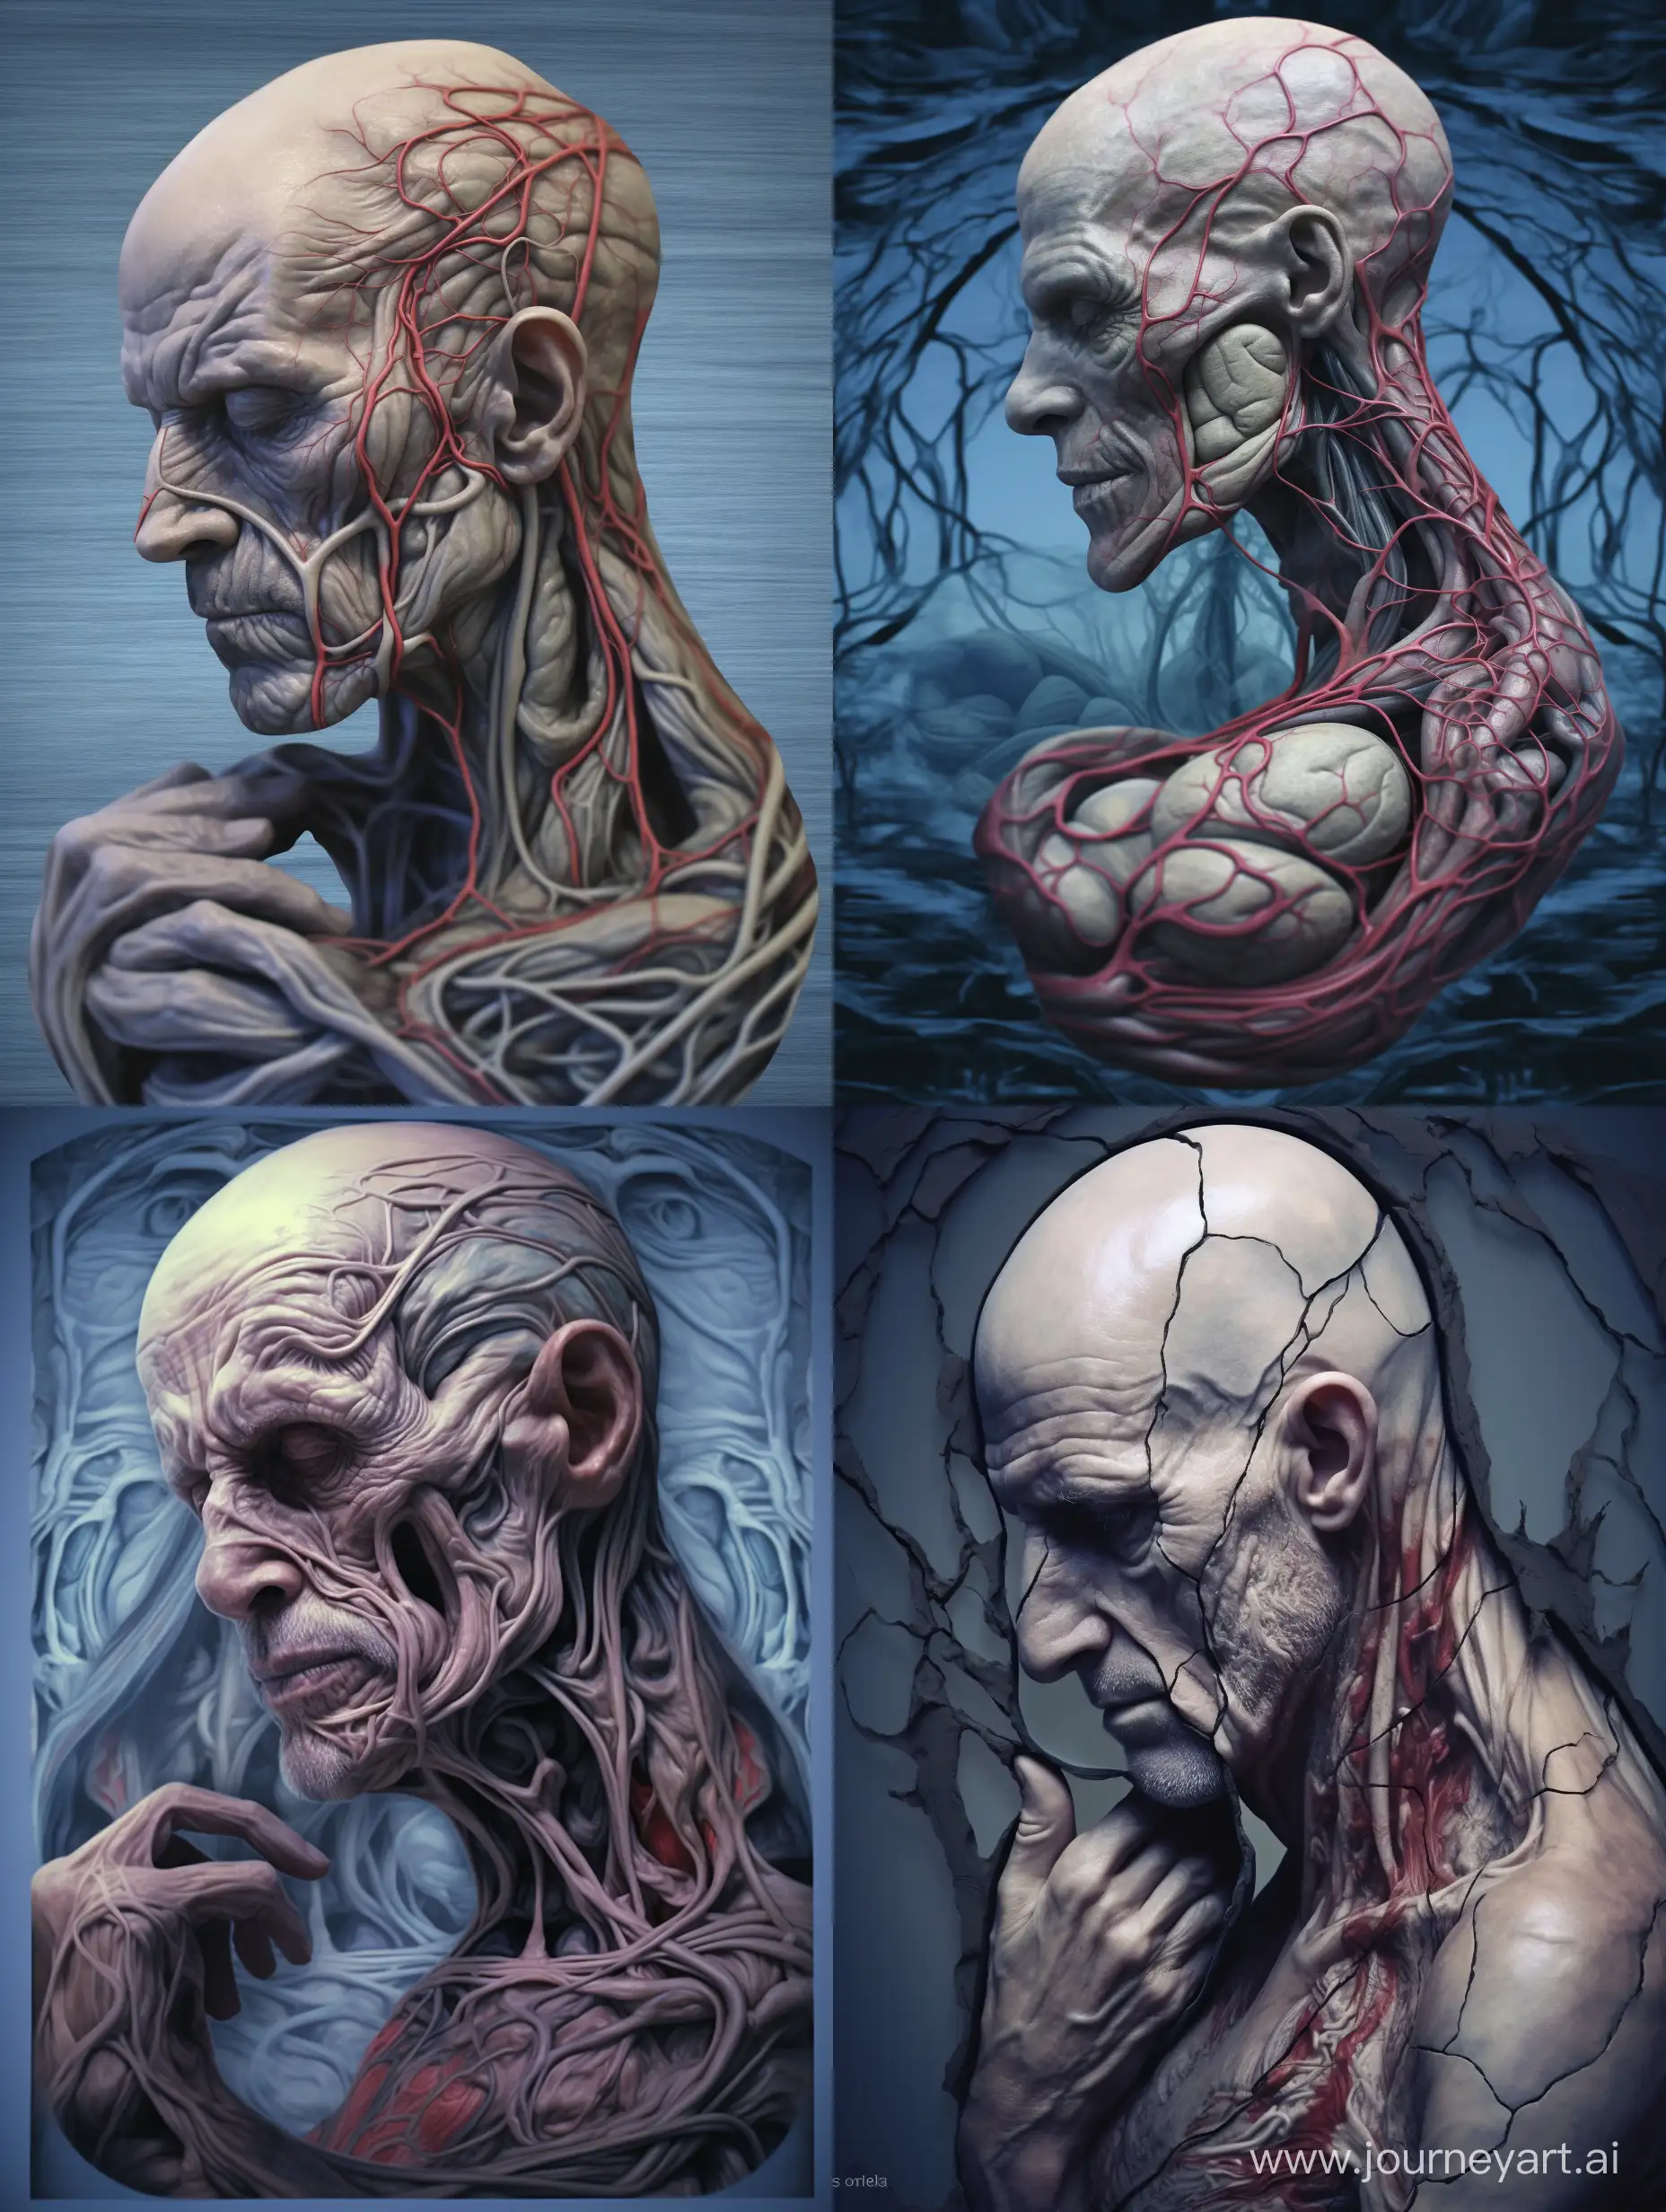 Detailed-Anatomical-Exploration-Human-Body-Muscles-in-Broken-Mirror-Reflection